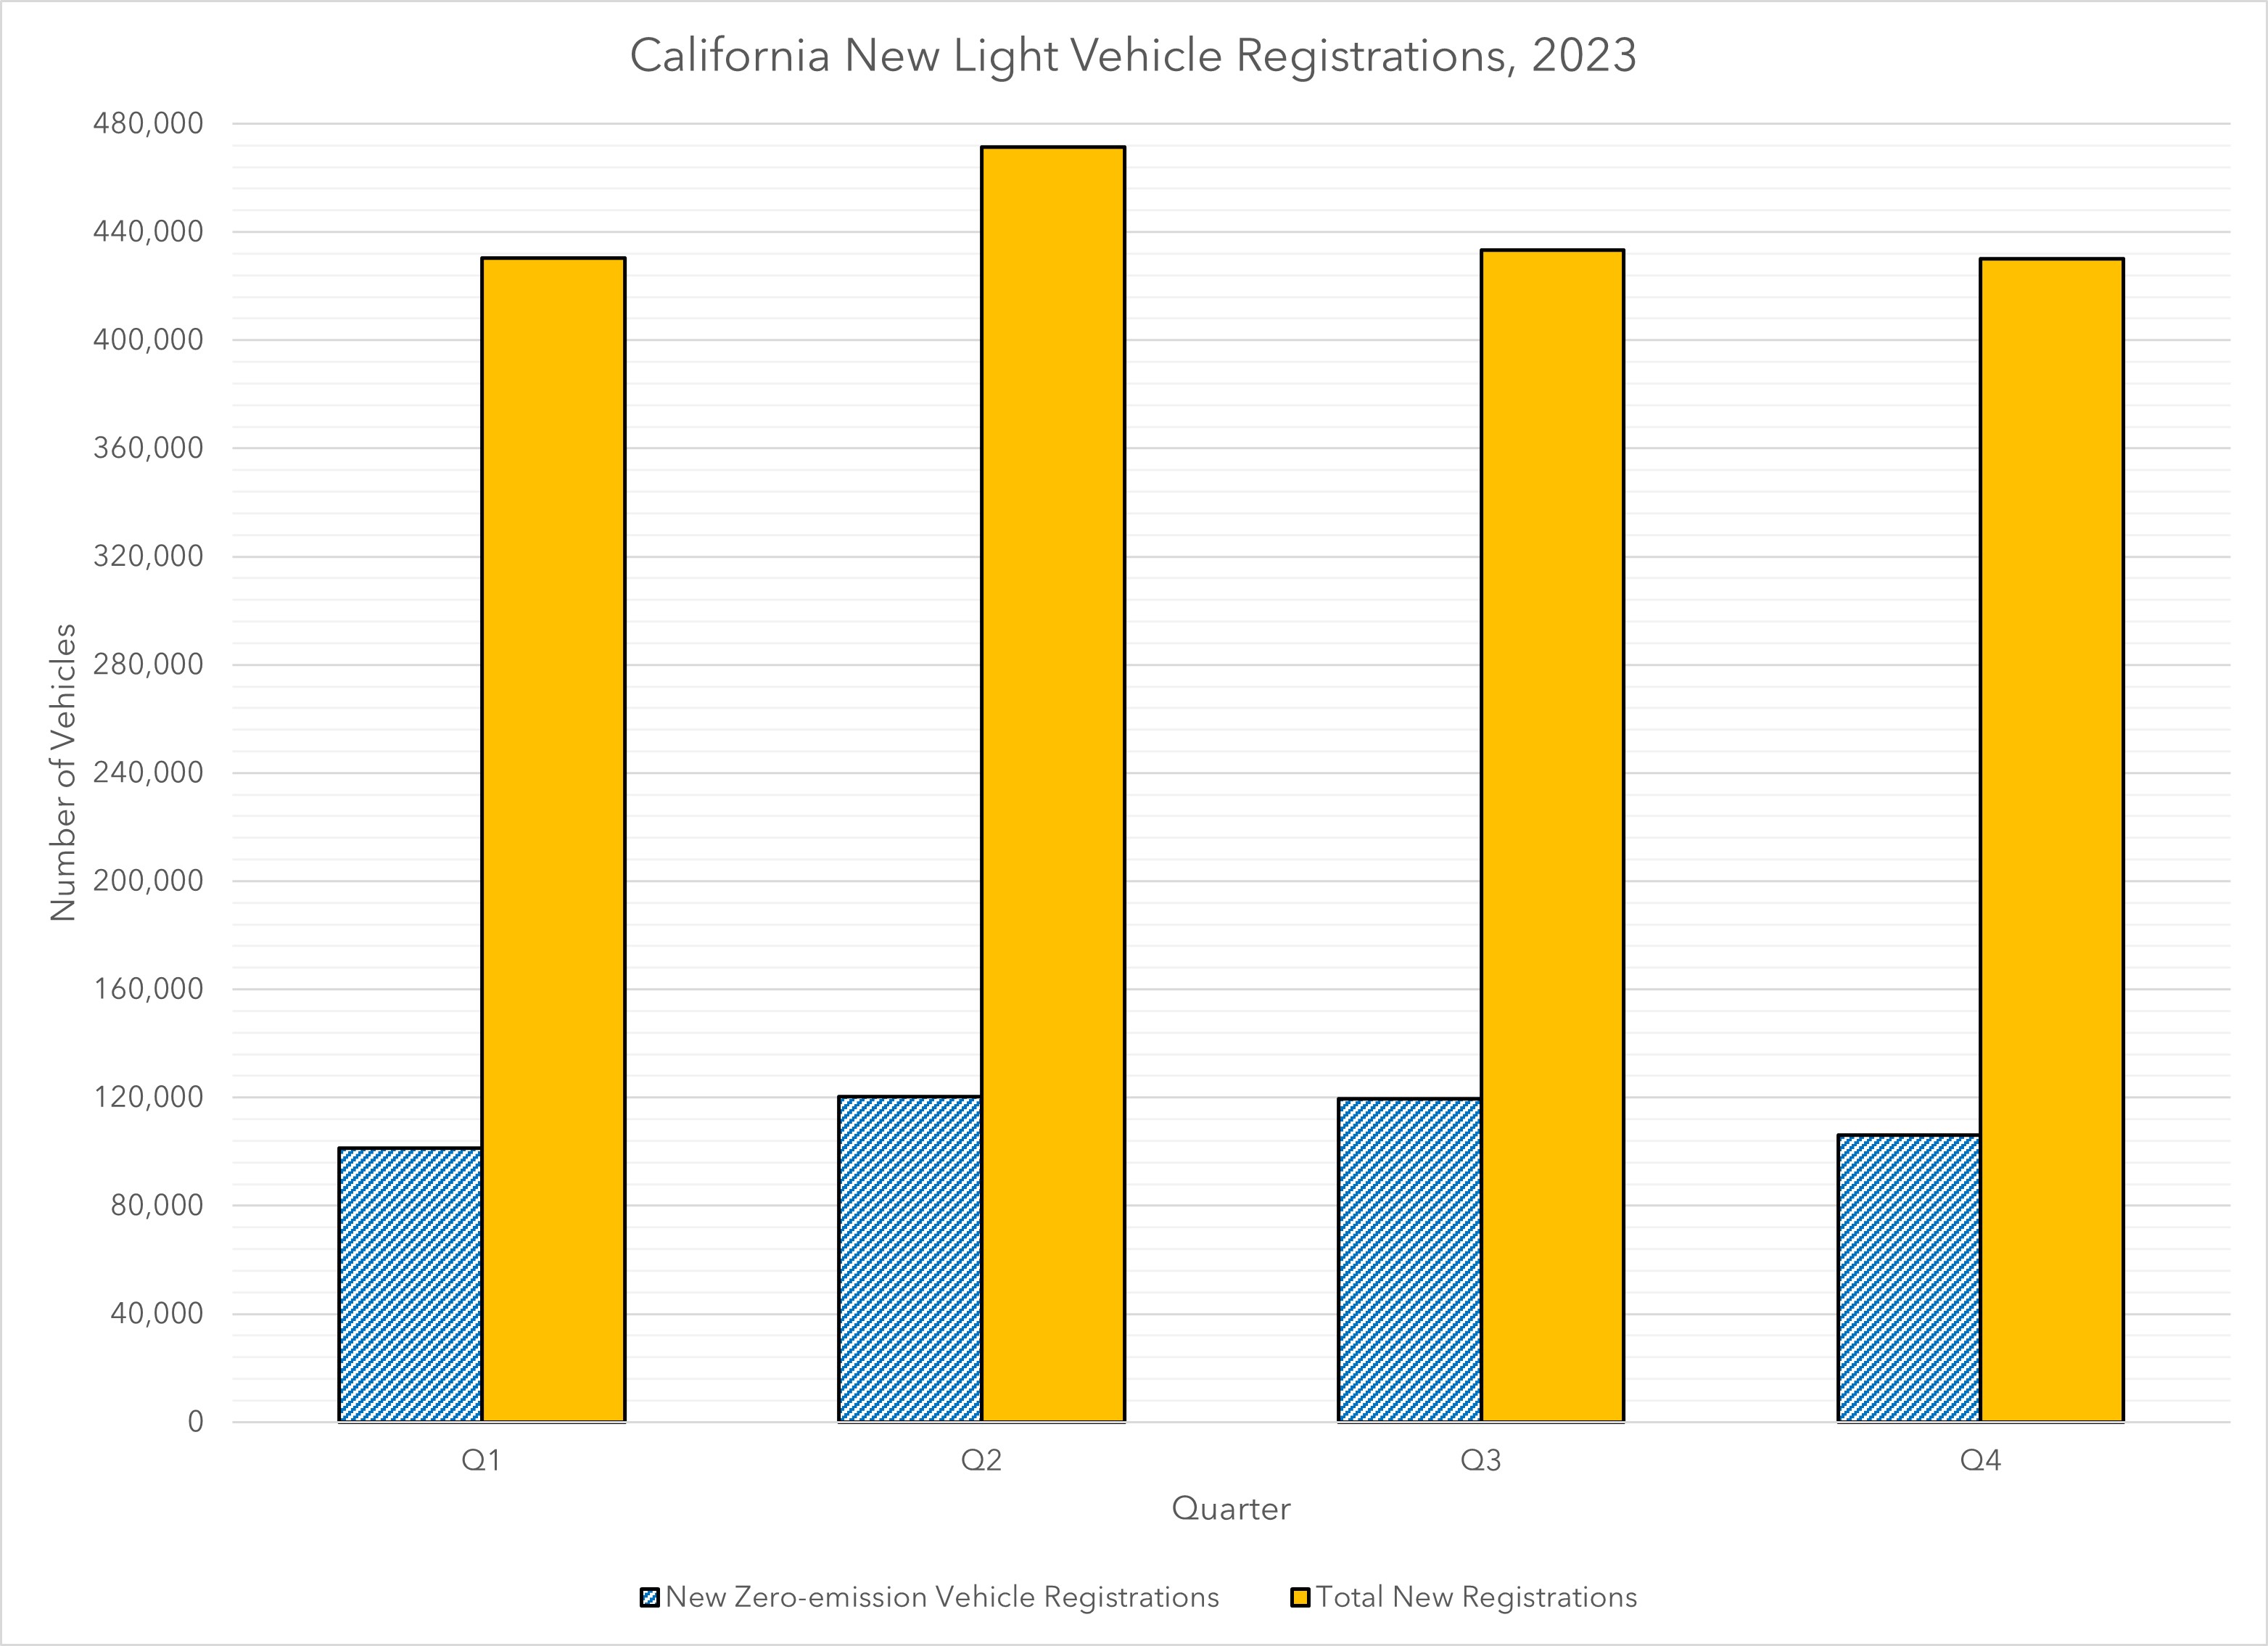 This visual displays California's 2023 light-duty new vehicle registrations by quarter. It compares new zero-emission vehicle registrations against total new vehicle registrations.